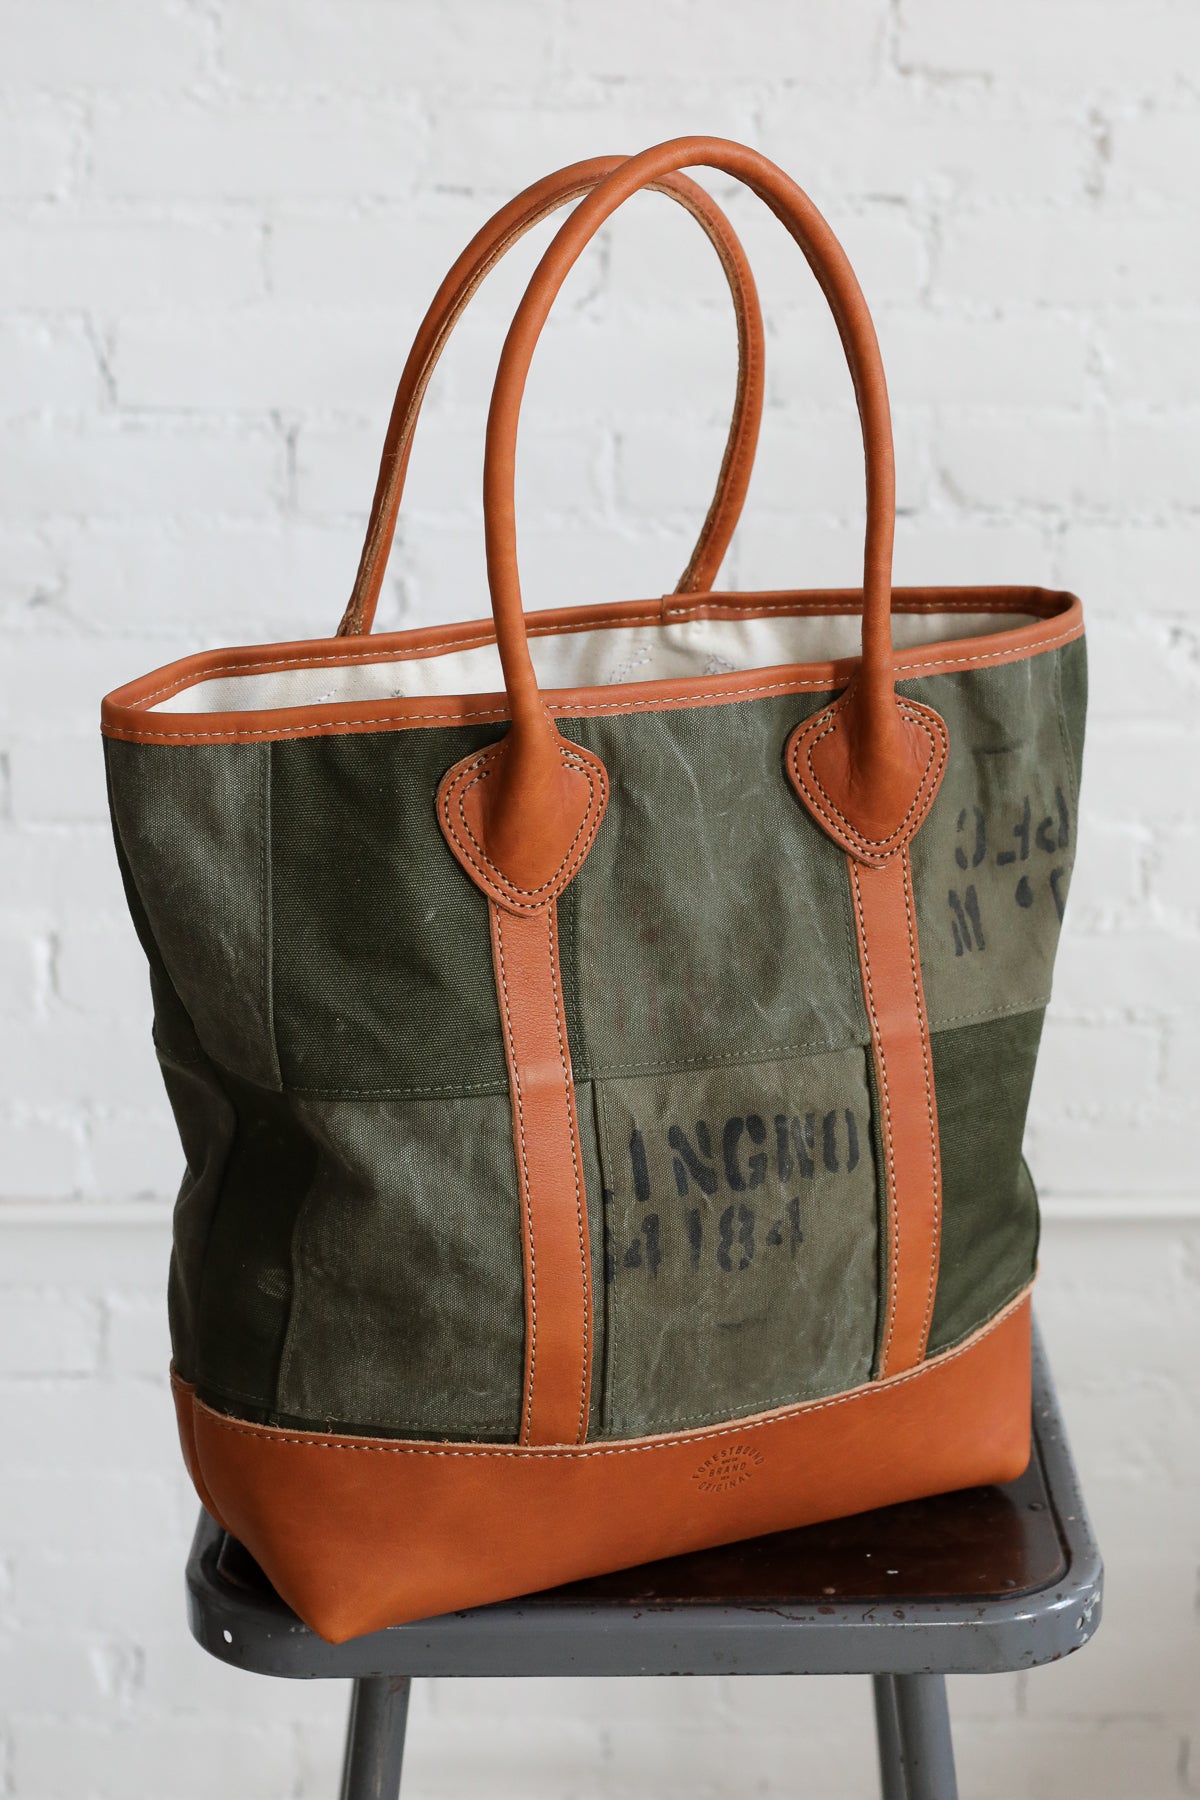 WWII era Salvaged Canvas Patchwork Tote Bag